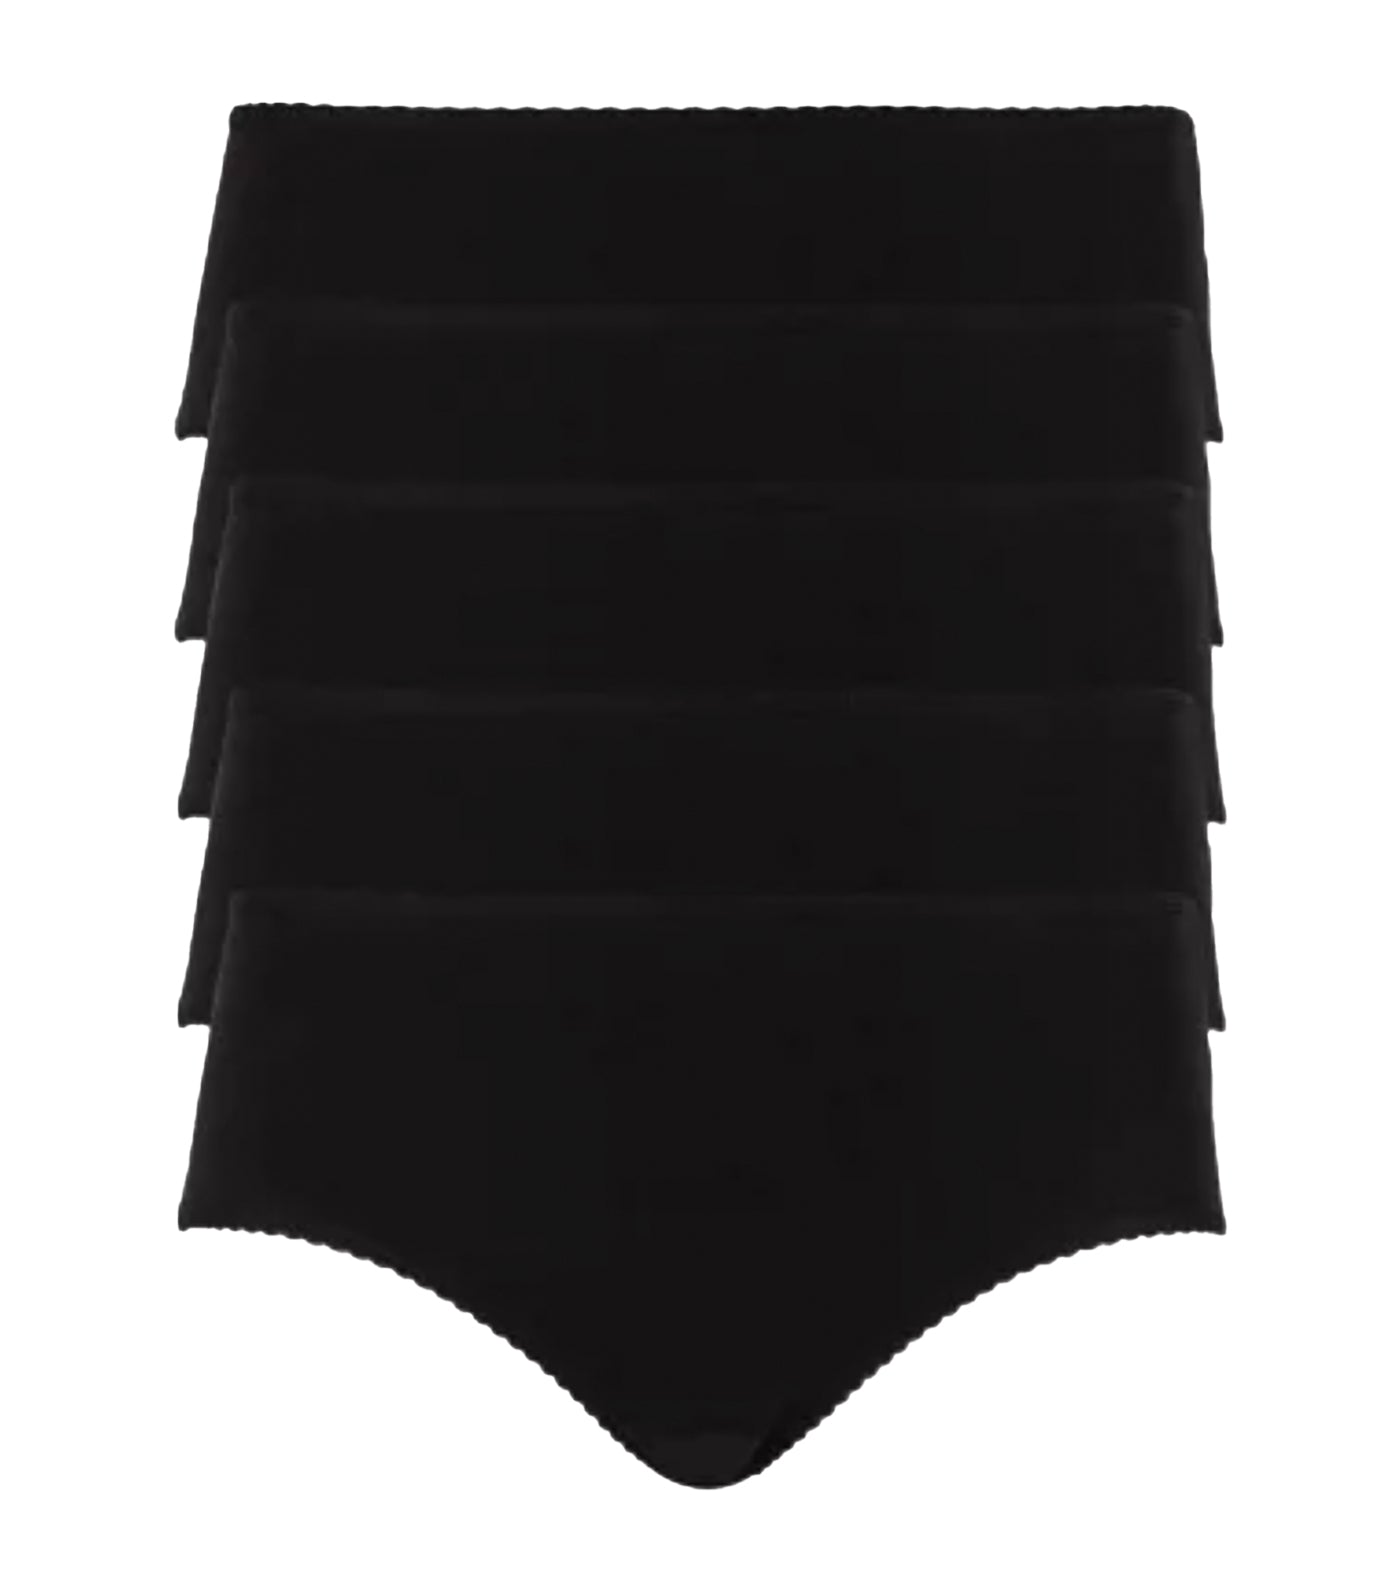 marks and spencer 5 pack cotton rich bikini knickers - black